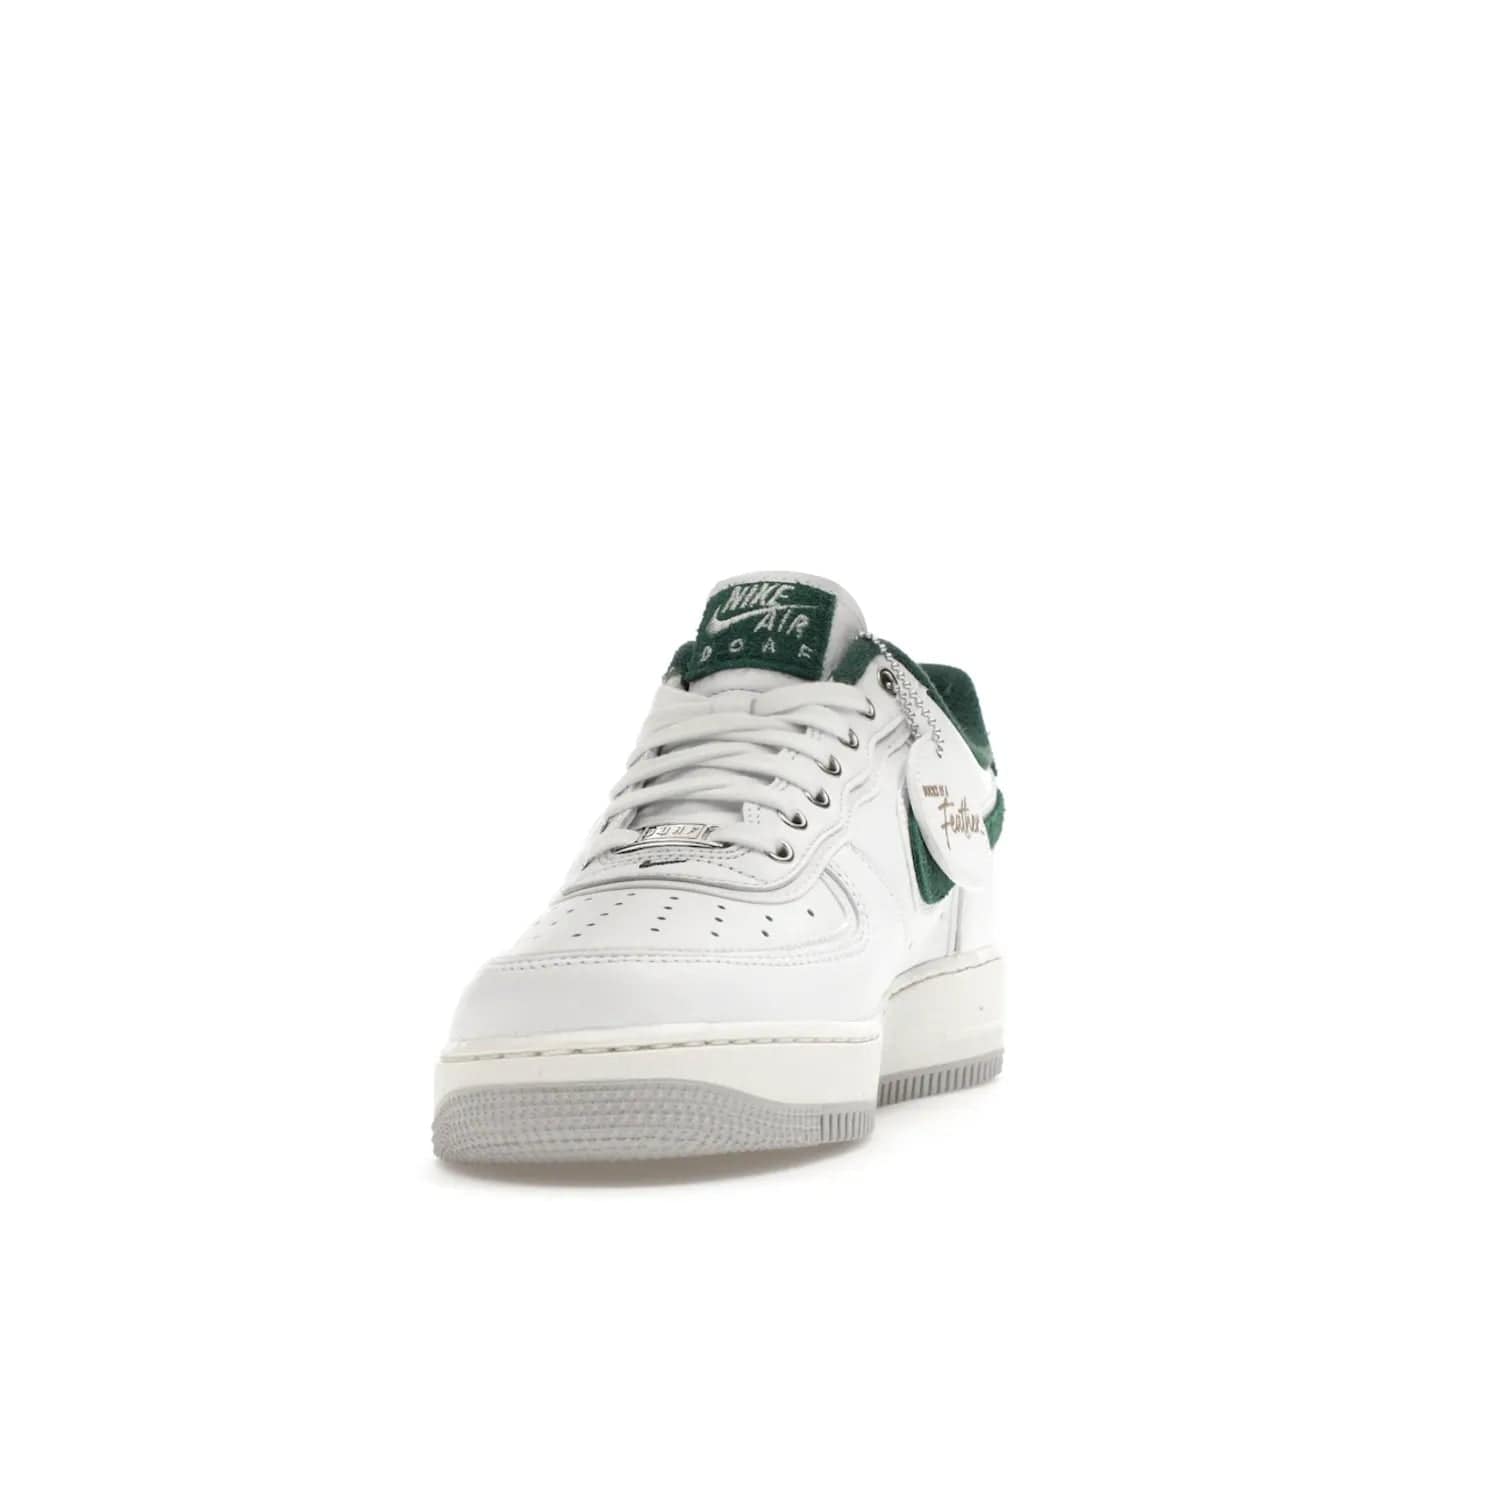 Nike Air Force 1 Low '07 Premium University of Oregon PE - Image 12 - Only at www.BallersClubKickz.com - The Nike Air Force 1 Low '07 Premium. Special Oregon University colorway. White base with green and sail accents. Cushioned rubber midsole. Comfort and style. Support your school!